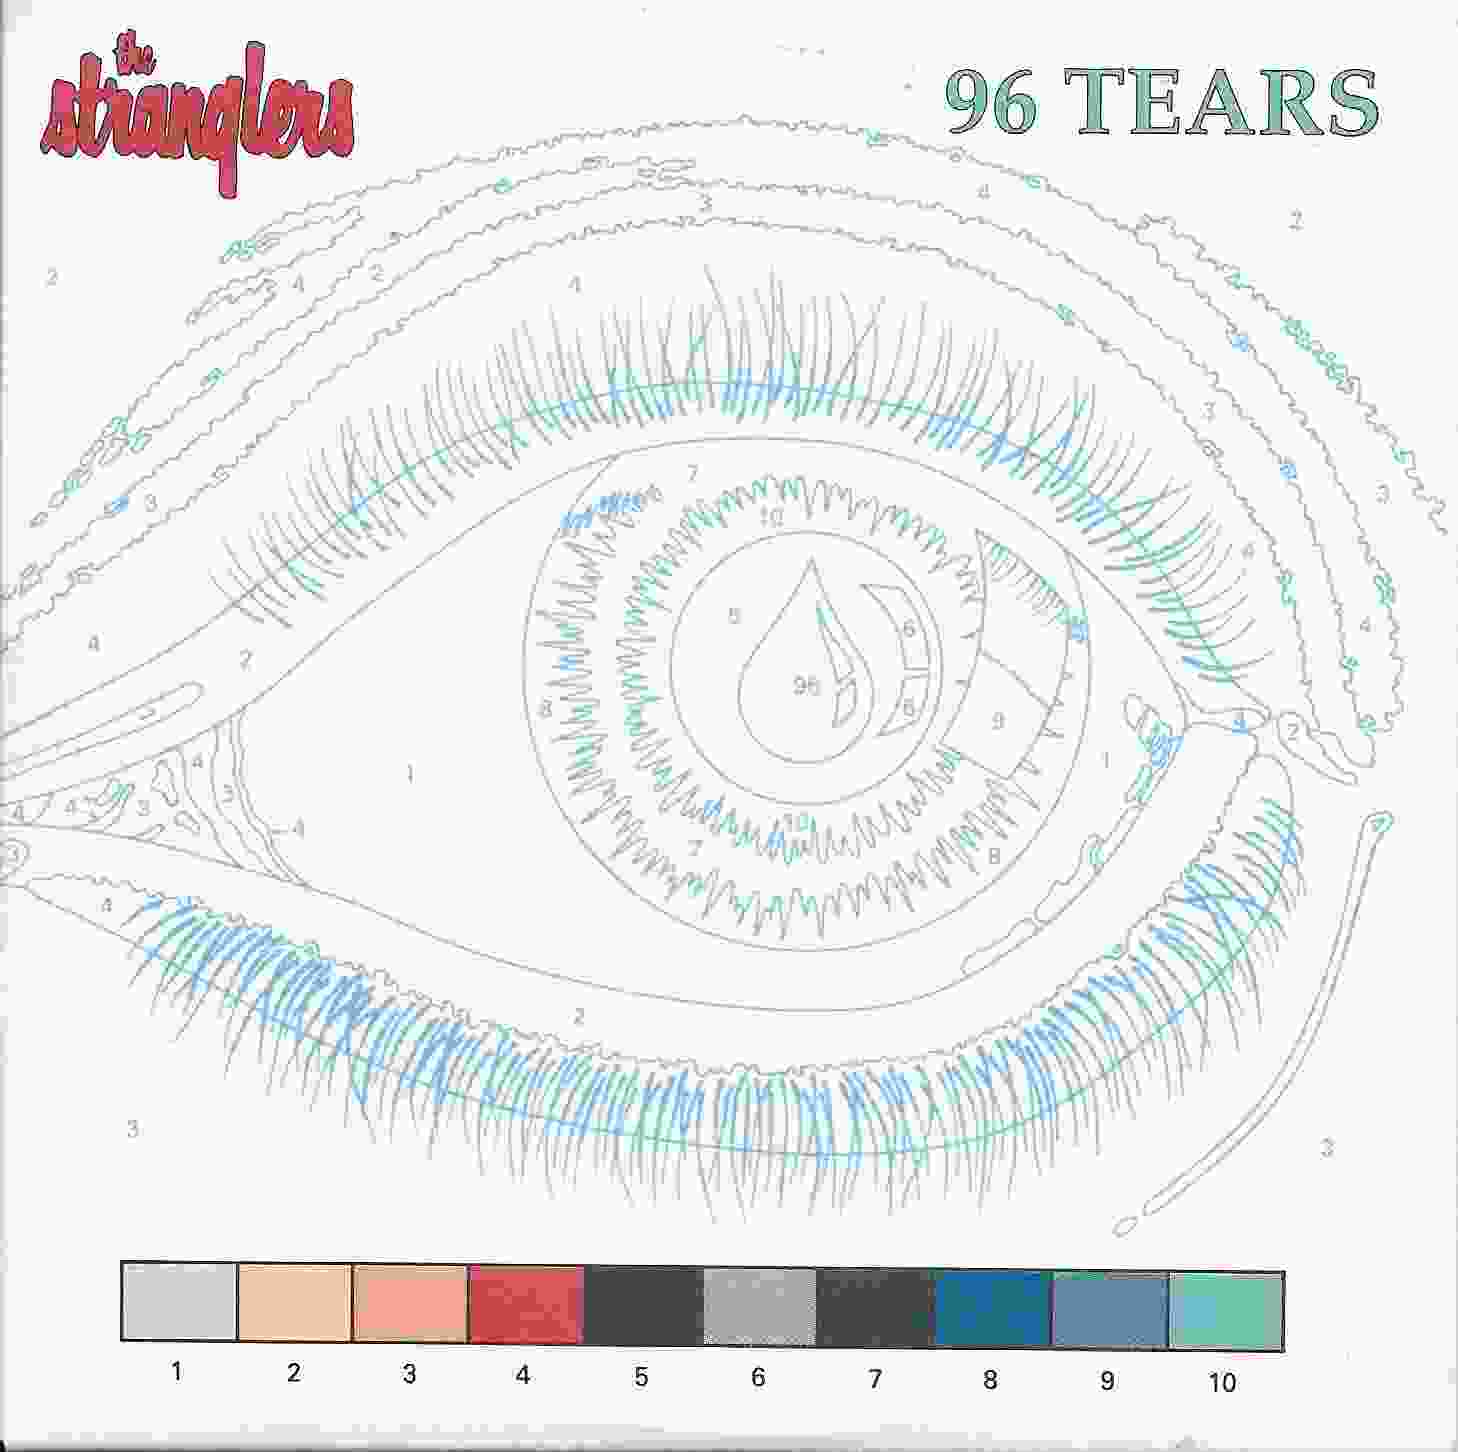 Picture of TEARS C 1 96 tears by artist The Stranglers 